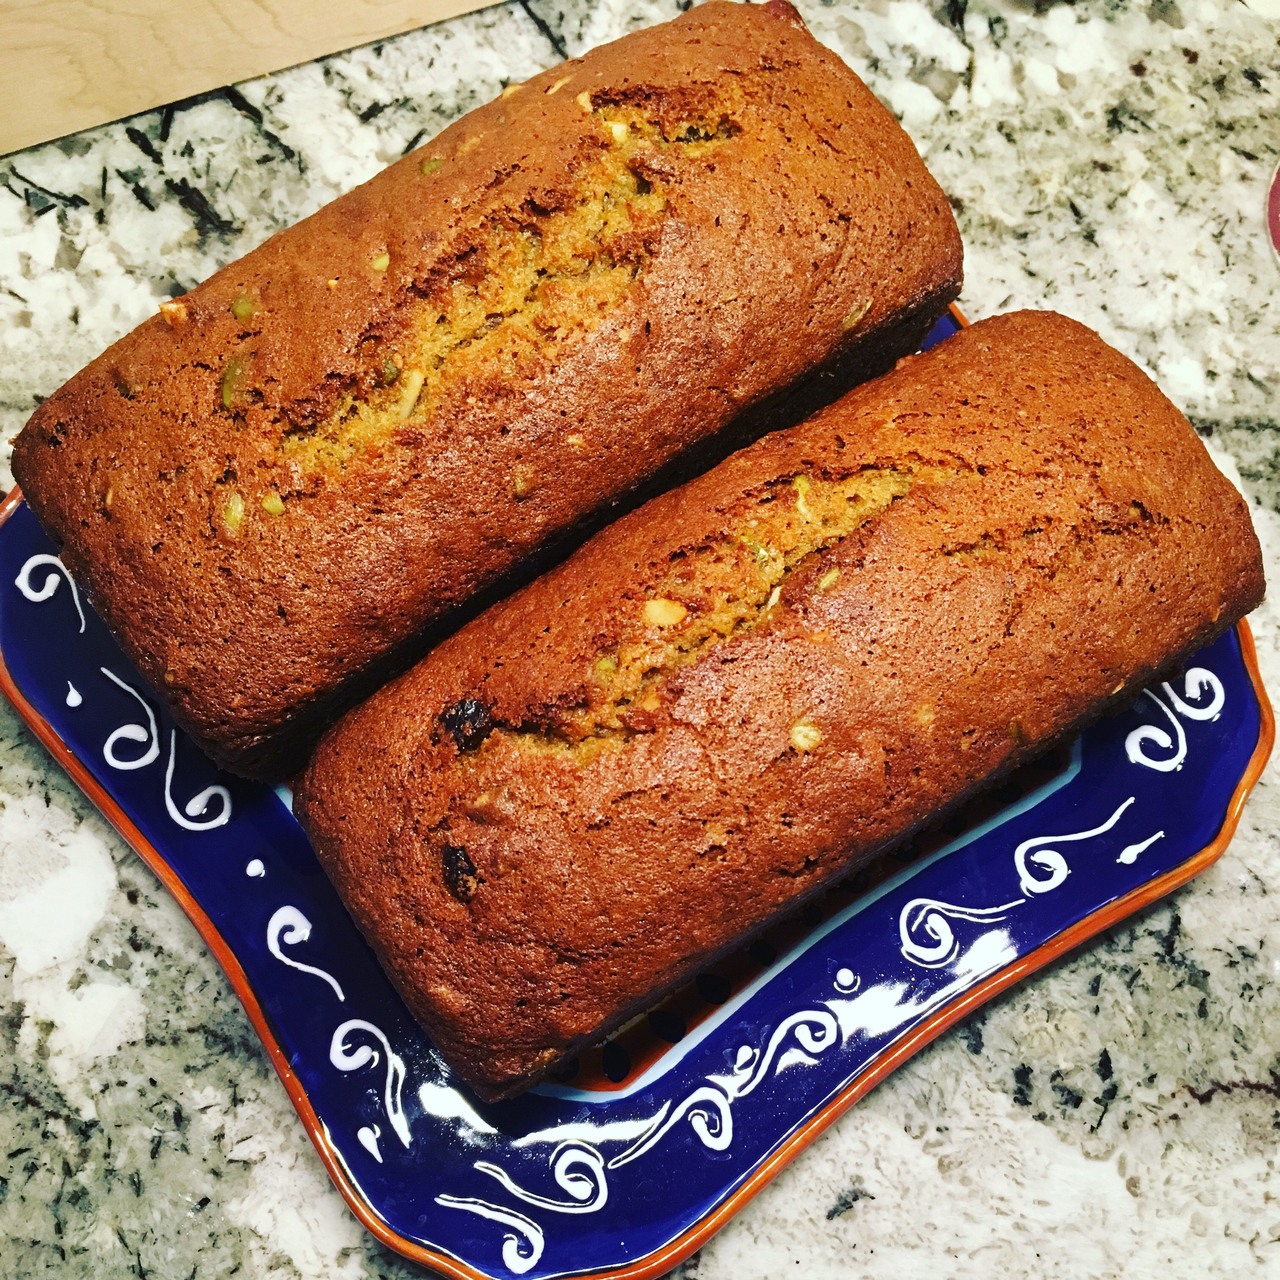 Two small, intensely colored loaves of sweet bread made from persimmon fruit.